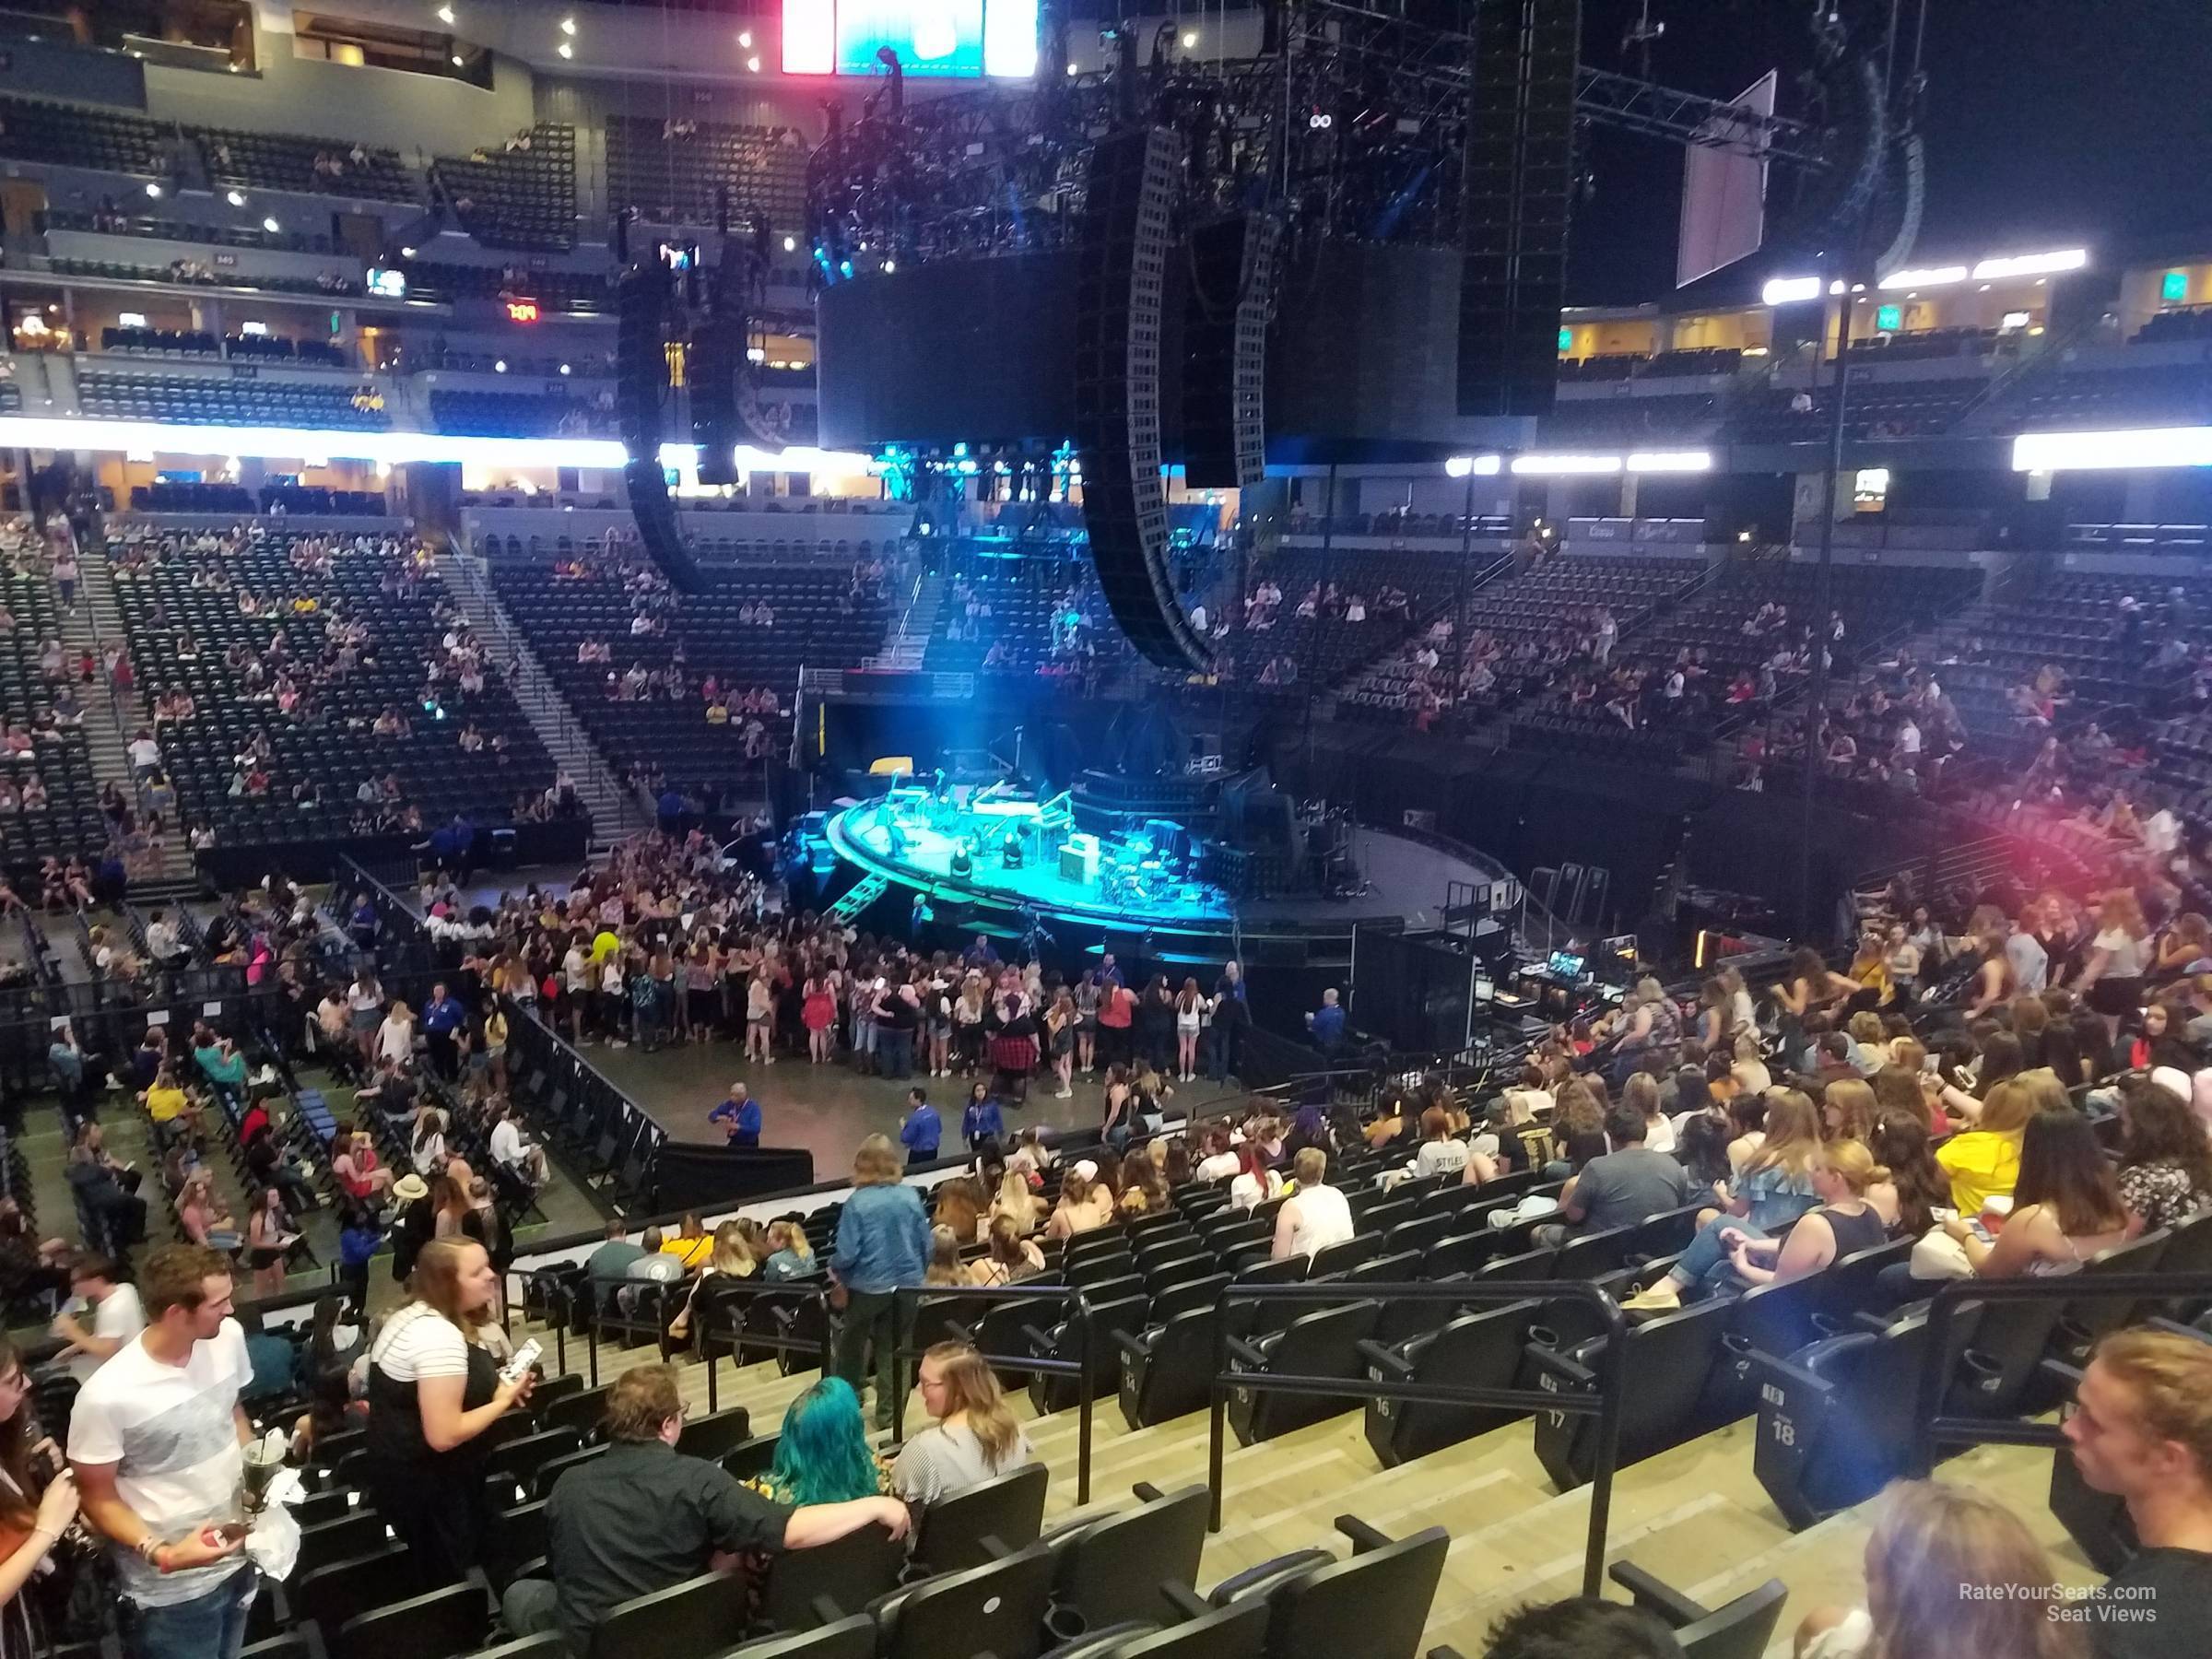 section 148, row 19 seat view  for concert - ball arena